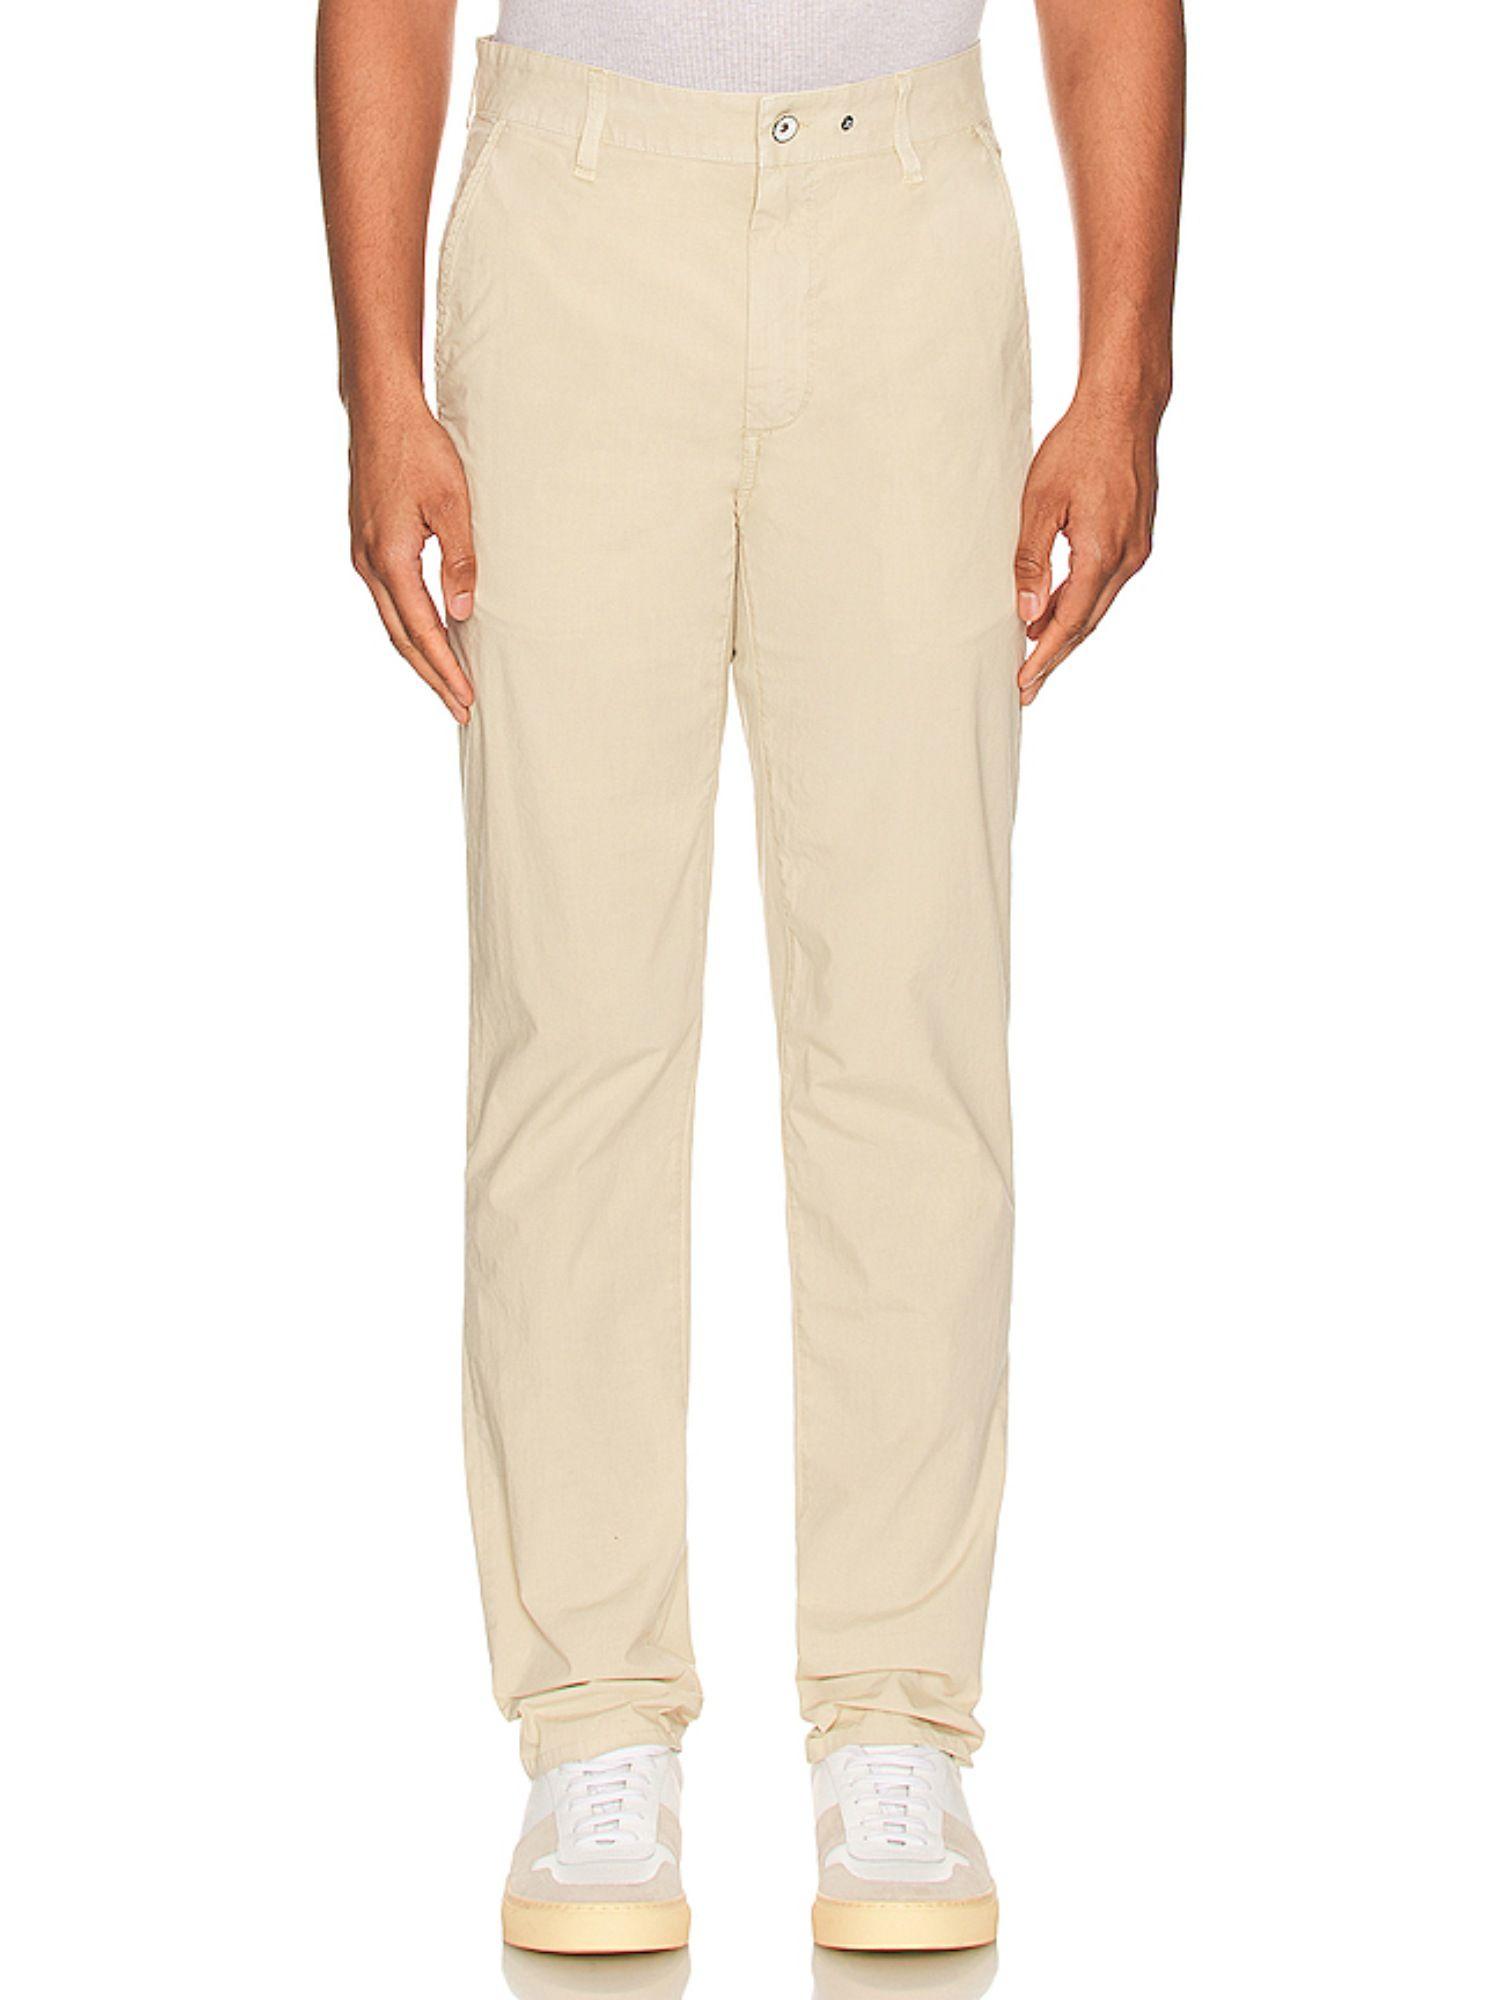 fit 2 stretch paper chino